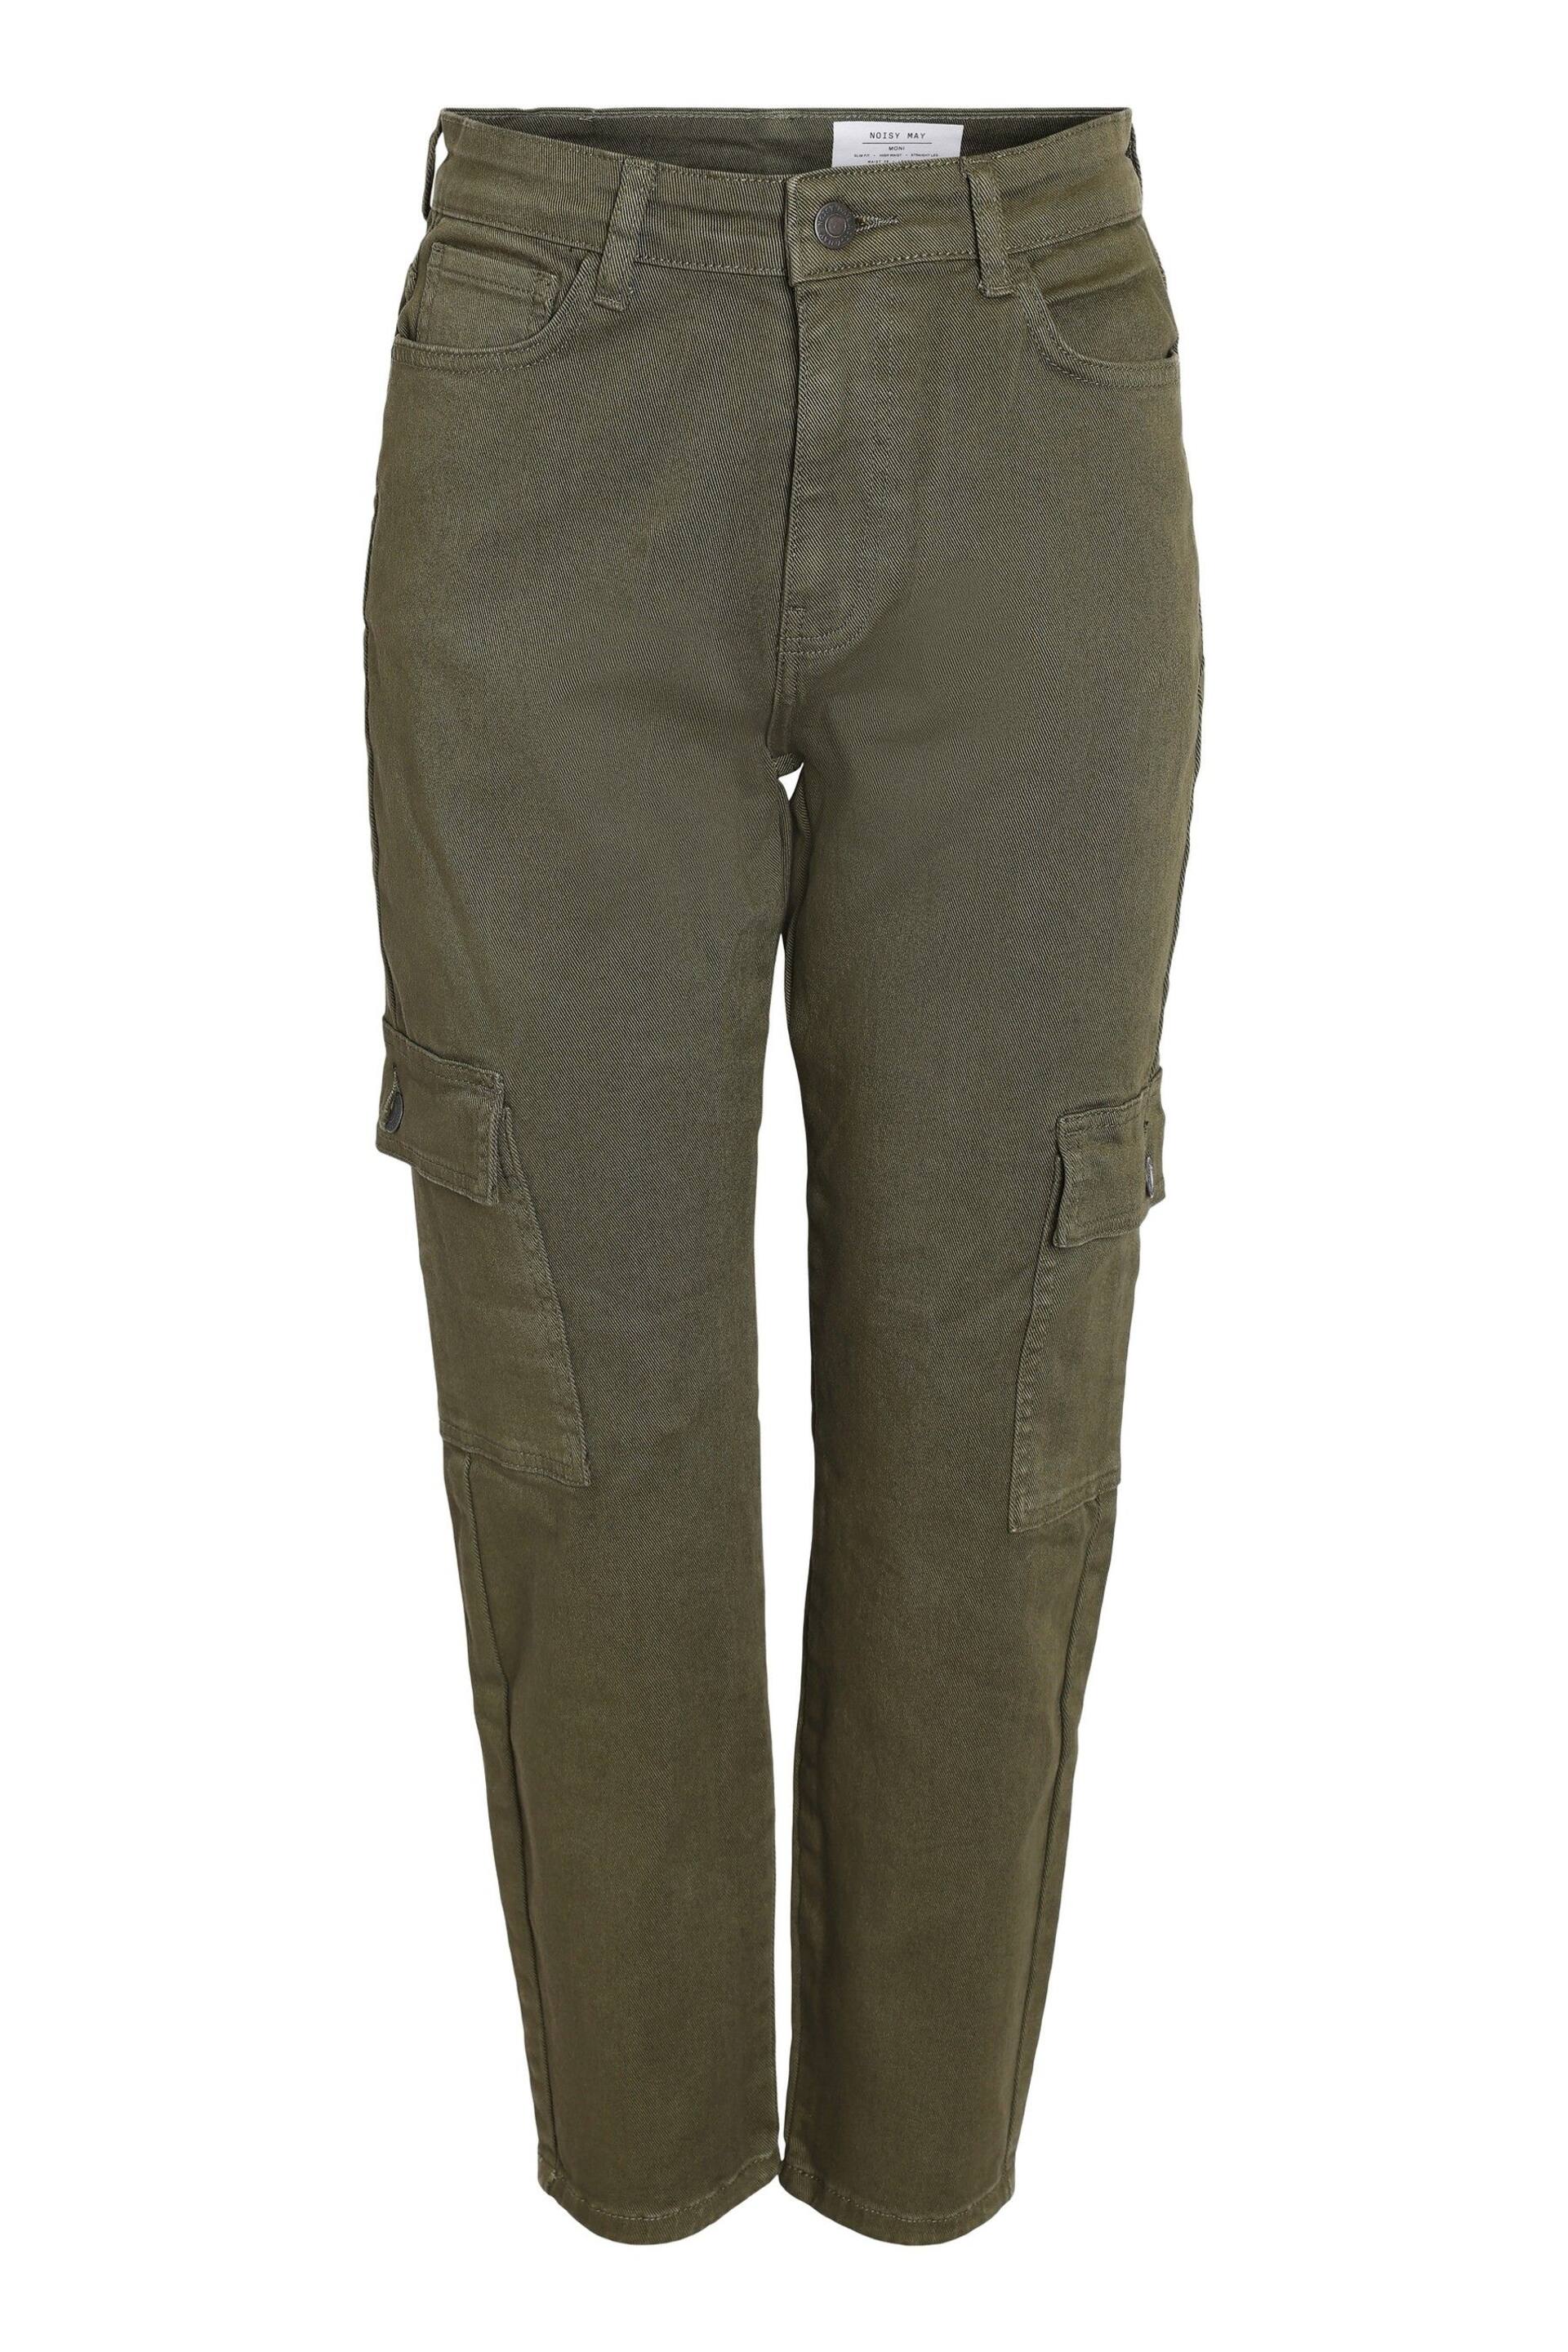 NOISY MAY Natural High Waisted Cargo Straight Leg Jeans - Image 6 of 6